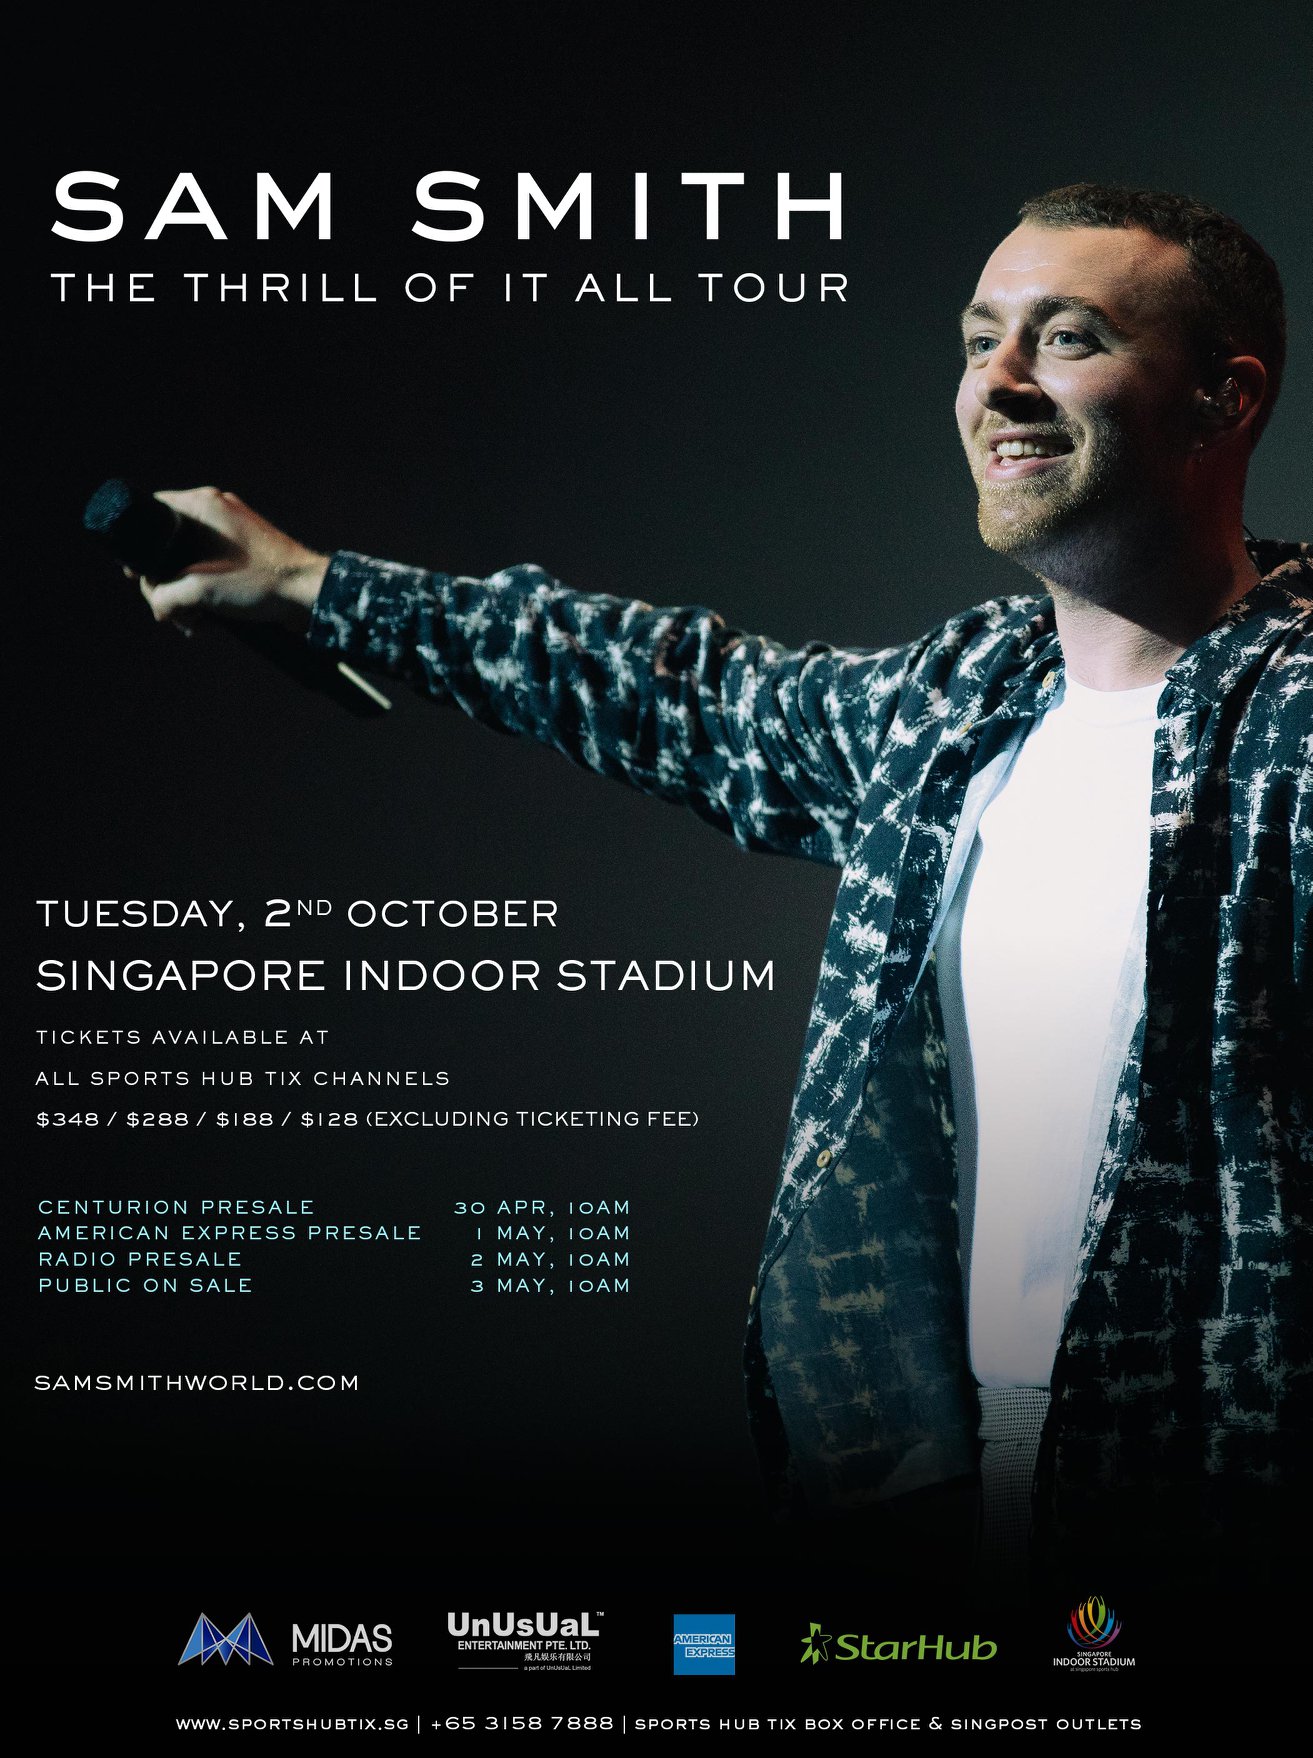 We Finally Have Ticketing Details For Sam Smith's Singapore Concert!